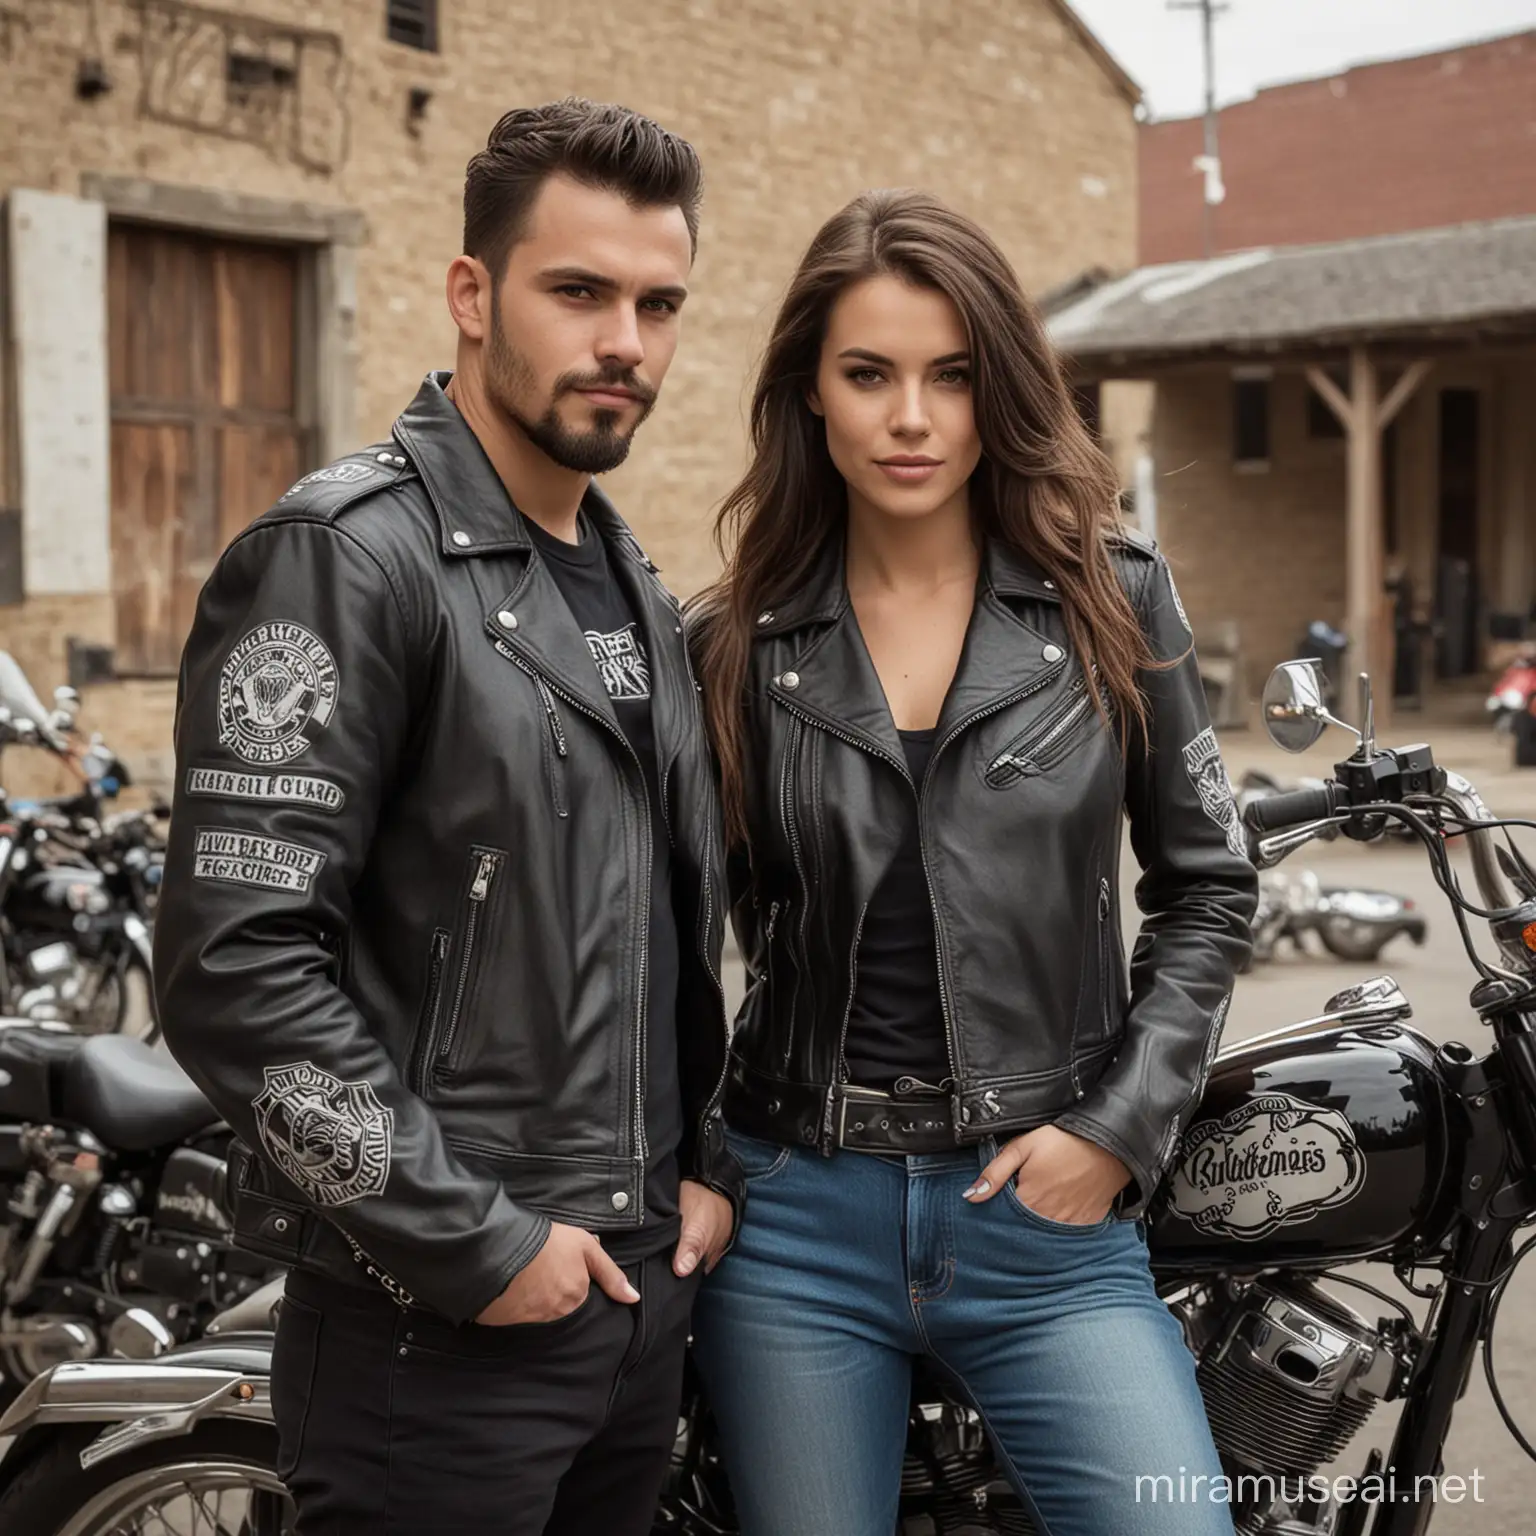 Stylish Couple in Authentic Motorcycle Club Setting